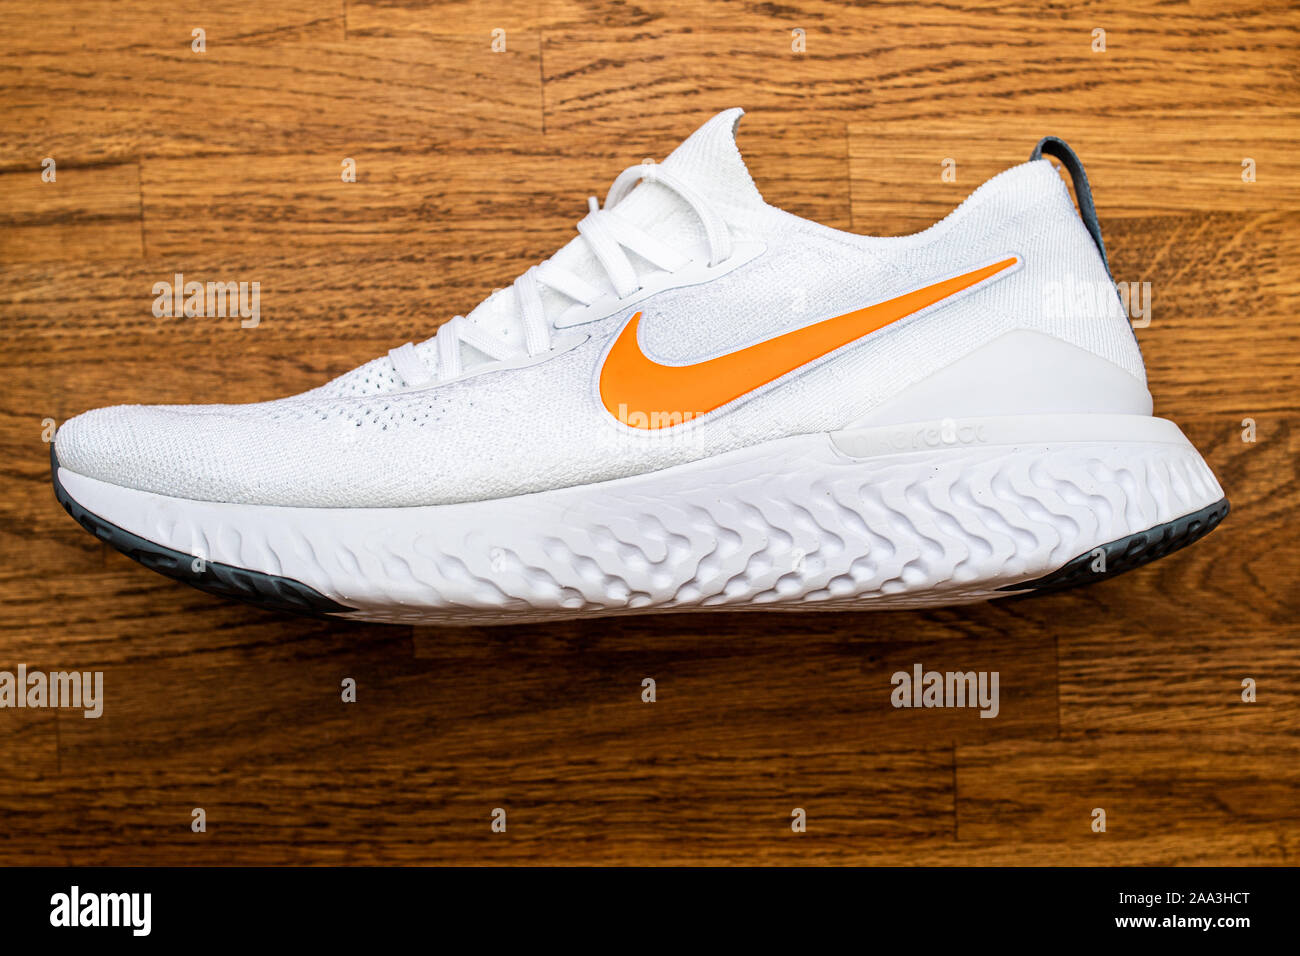 Paris, France - Jul 8, 2019: View from above of new Nike Epic React flyknit  running professional shoe with orange Nike Swoosh logotype Stock Photo -  Alamy